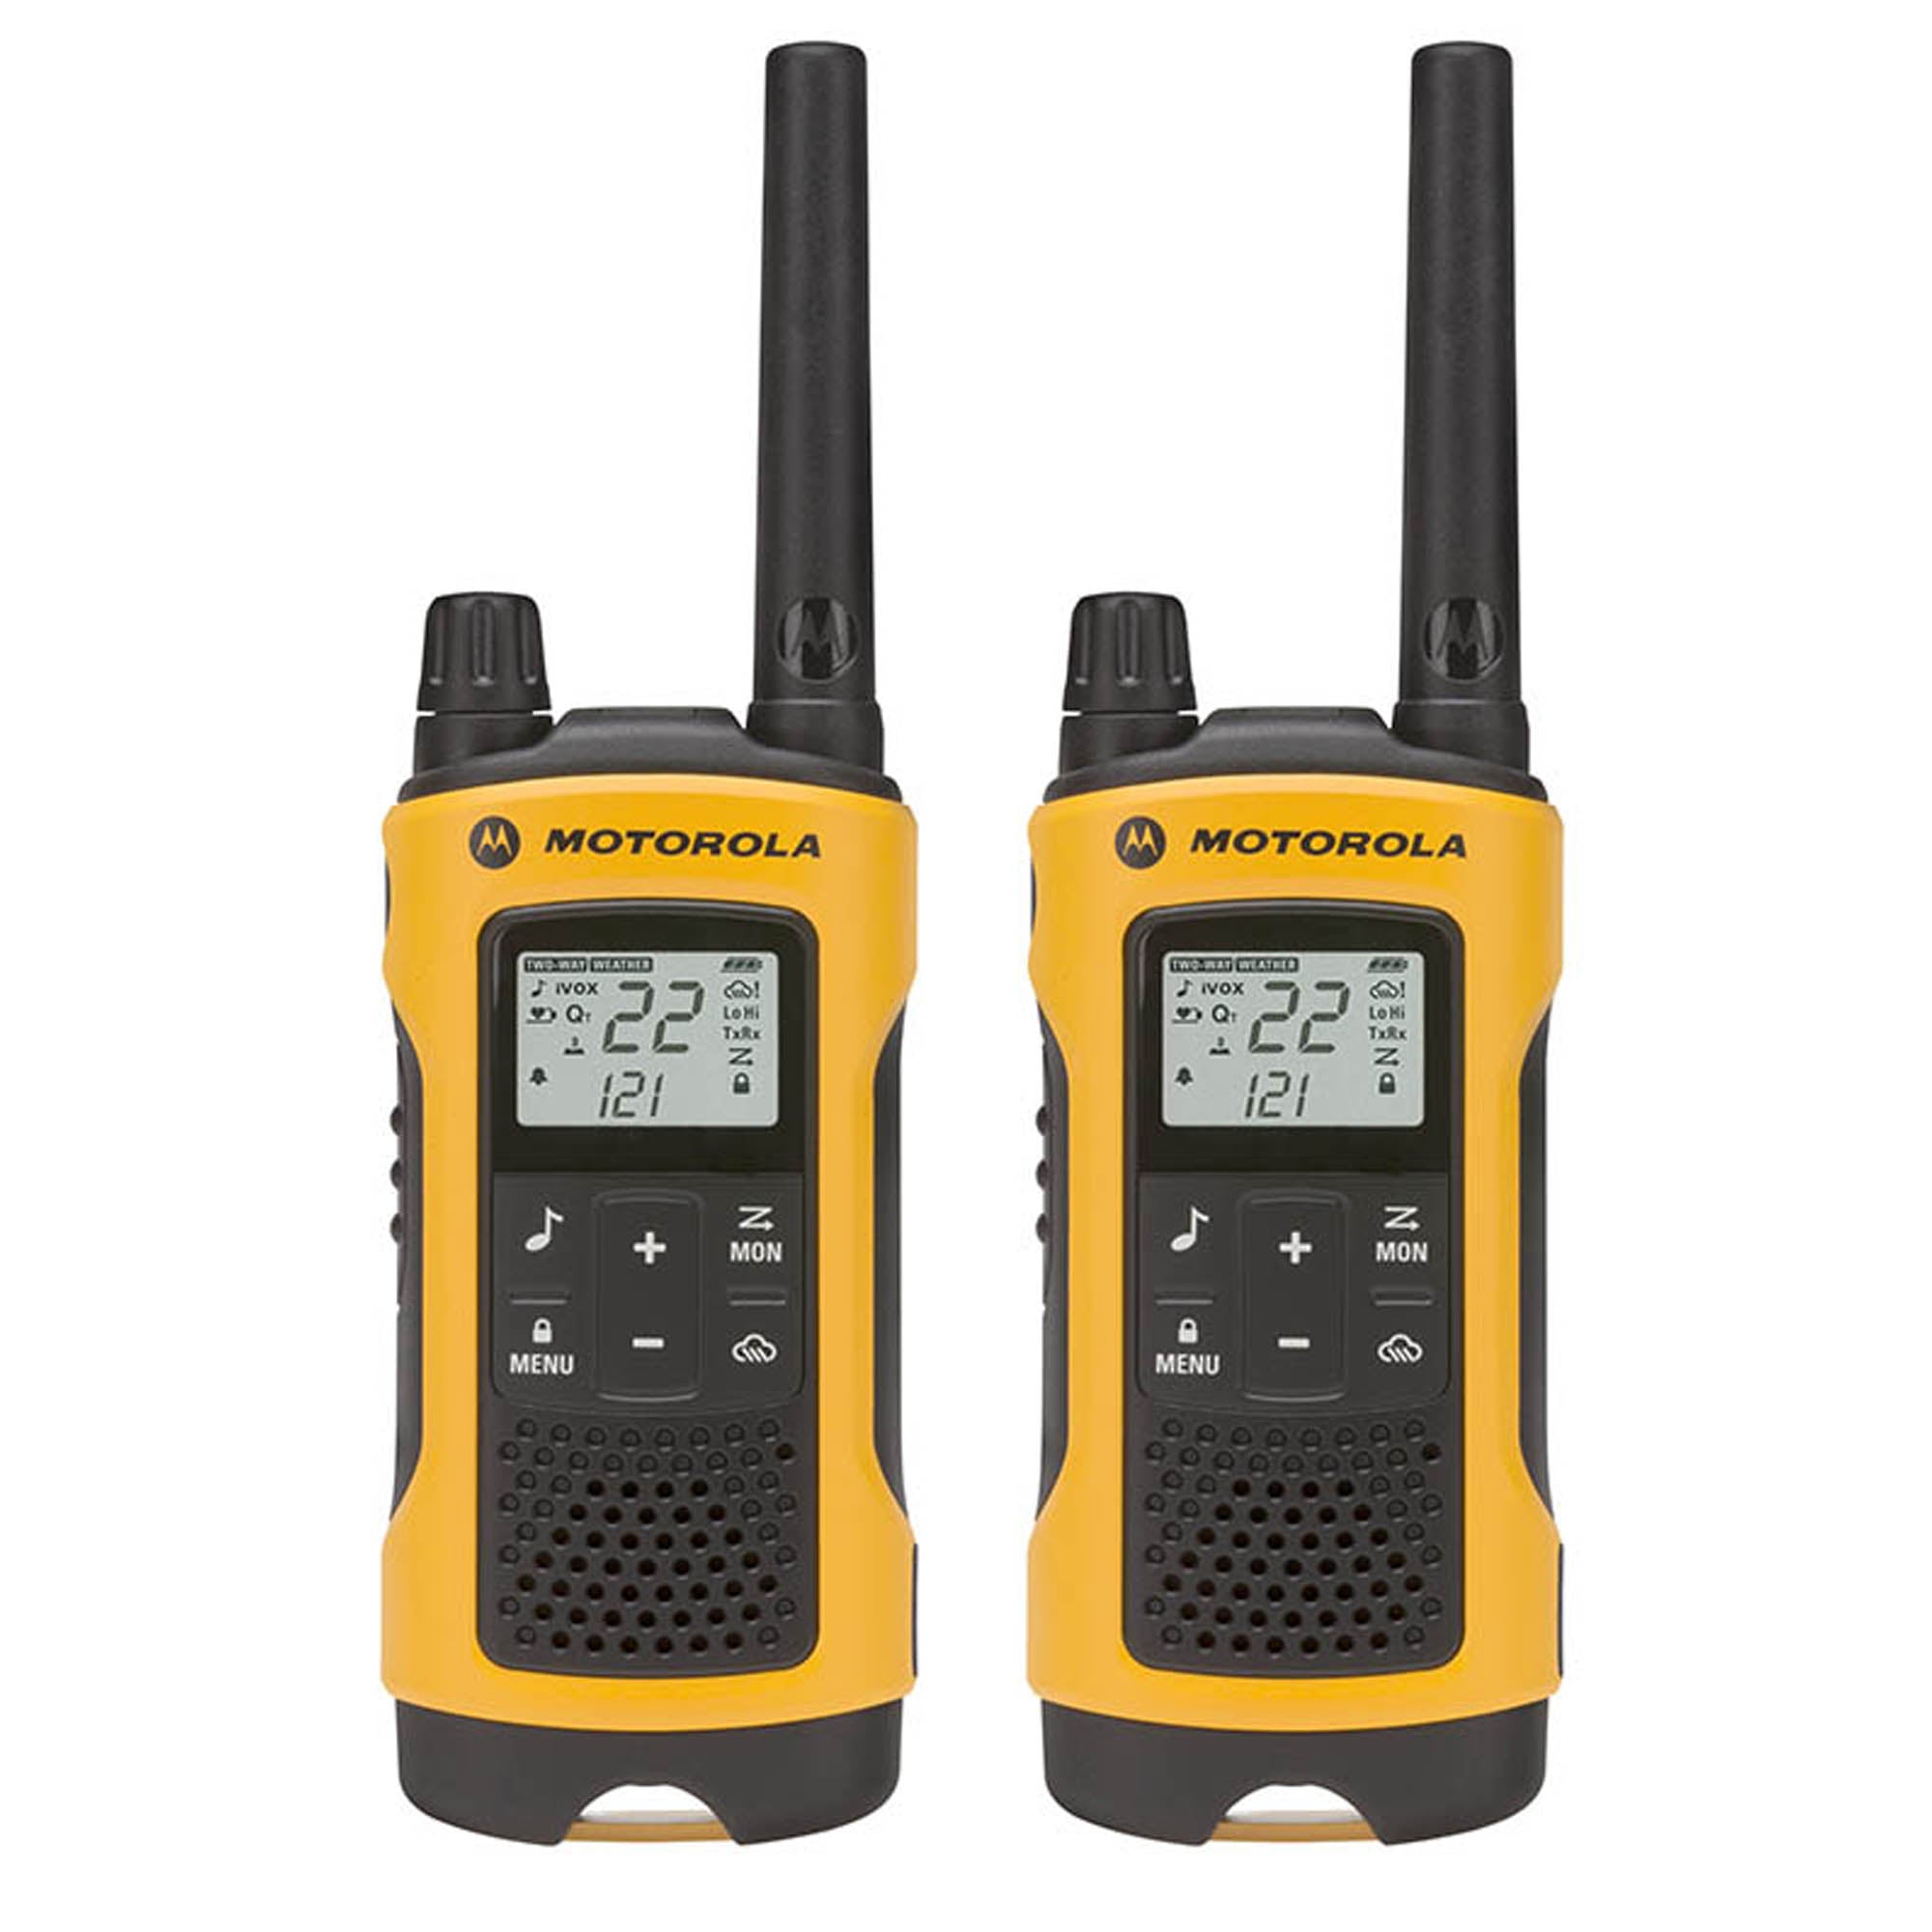 MOTOROLA Talkabout T402 Rechargeable Two-Way Radios (2-Pack) - 1